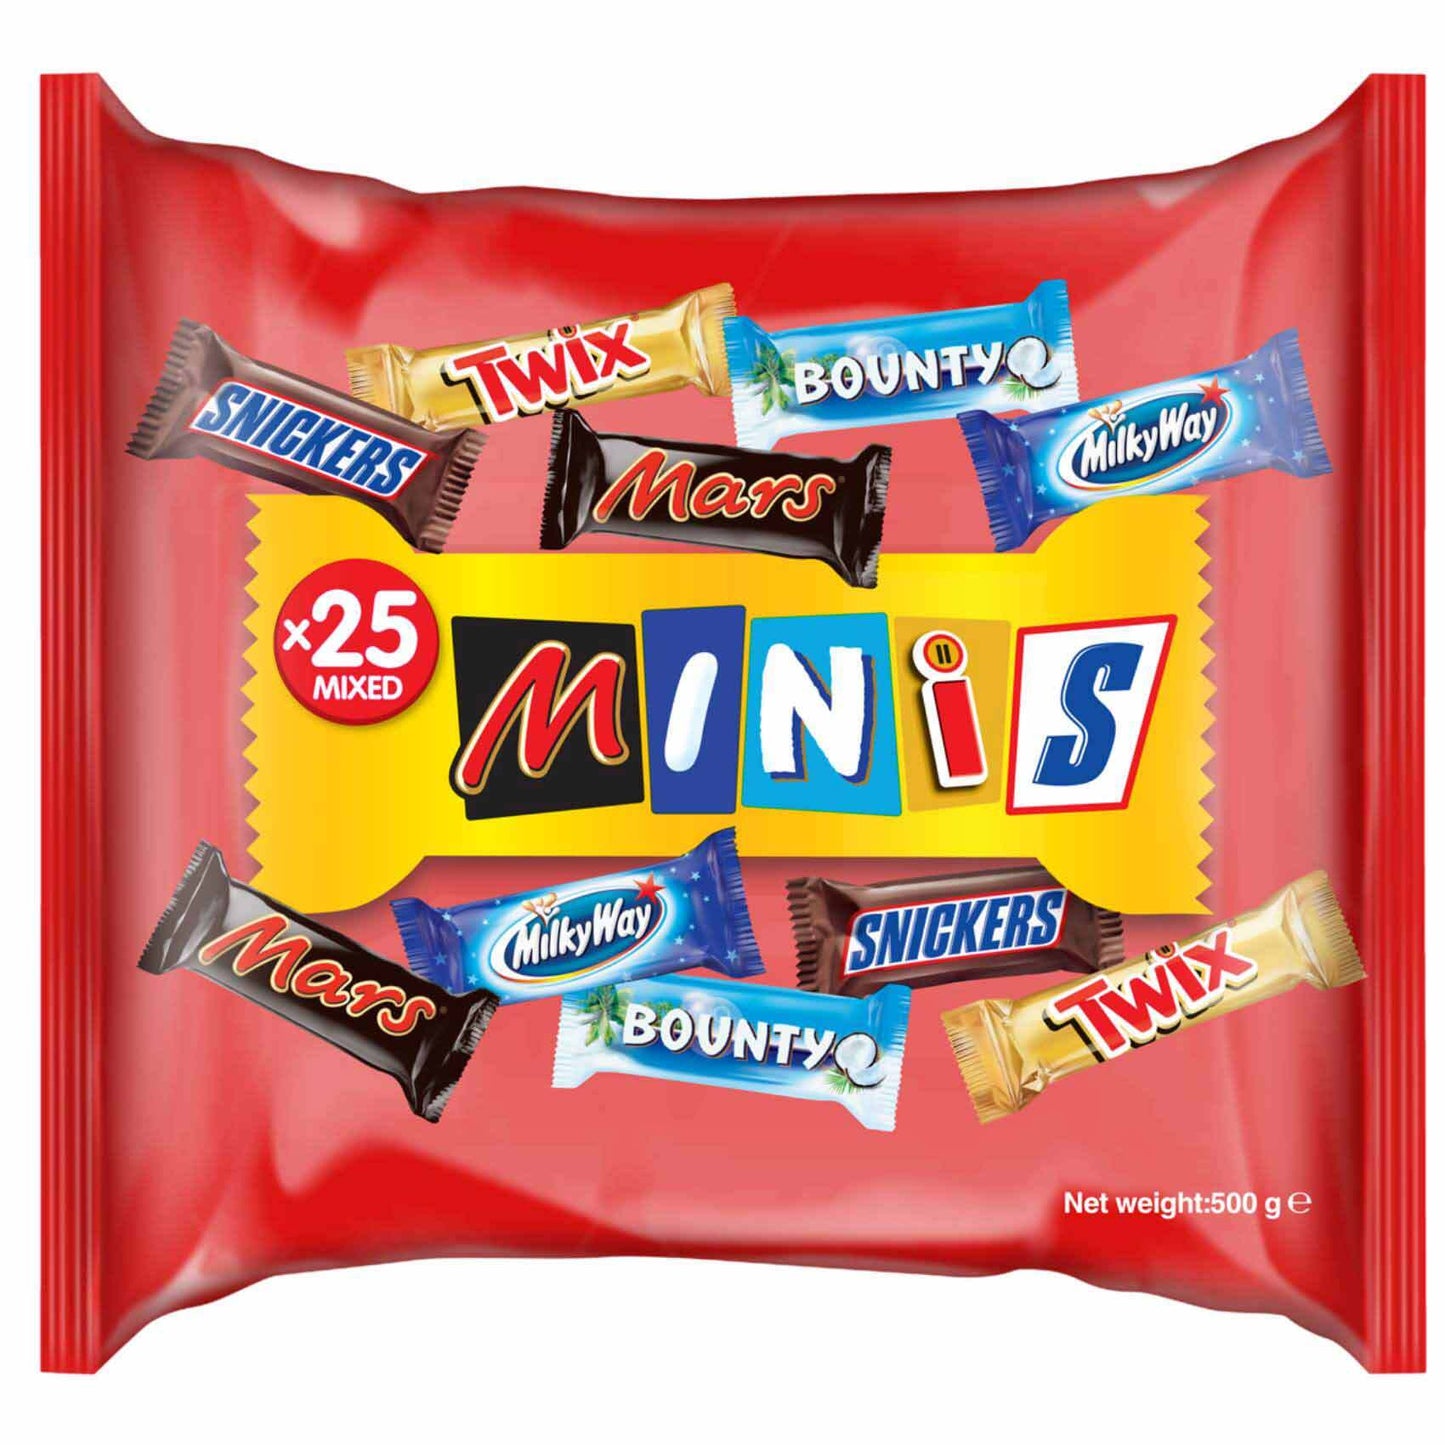 Mars Best of Minis Chocolate - 25 Mix Bars - 500 gm - red